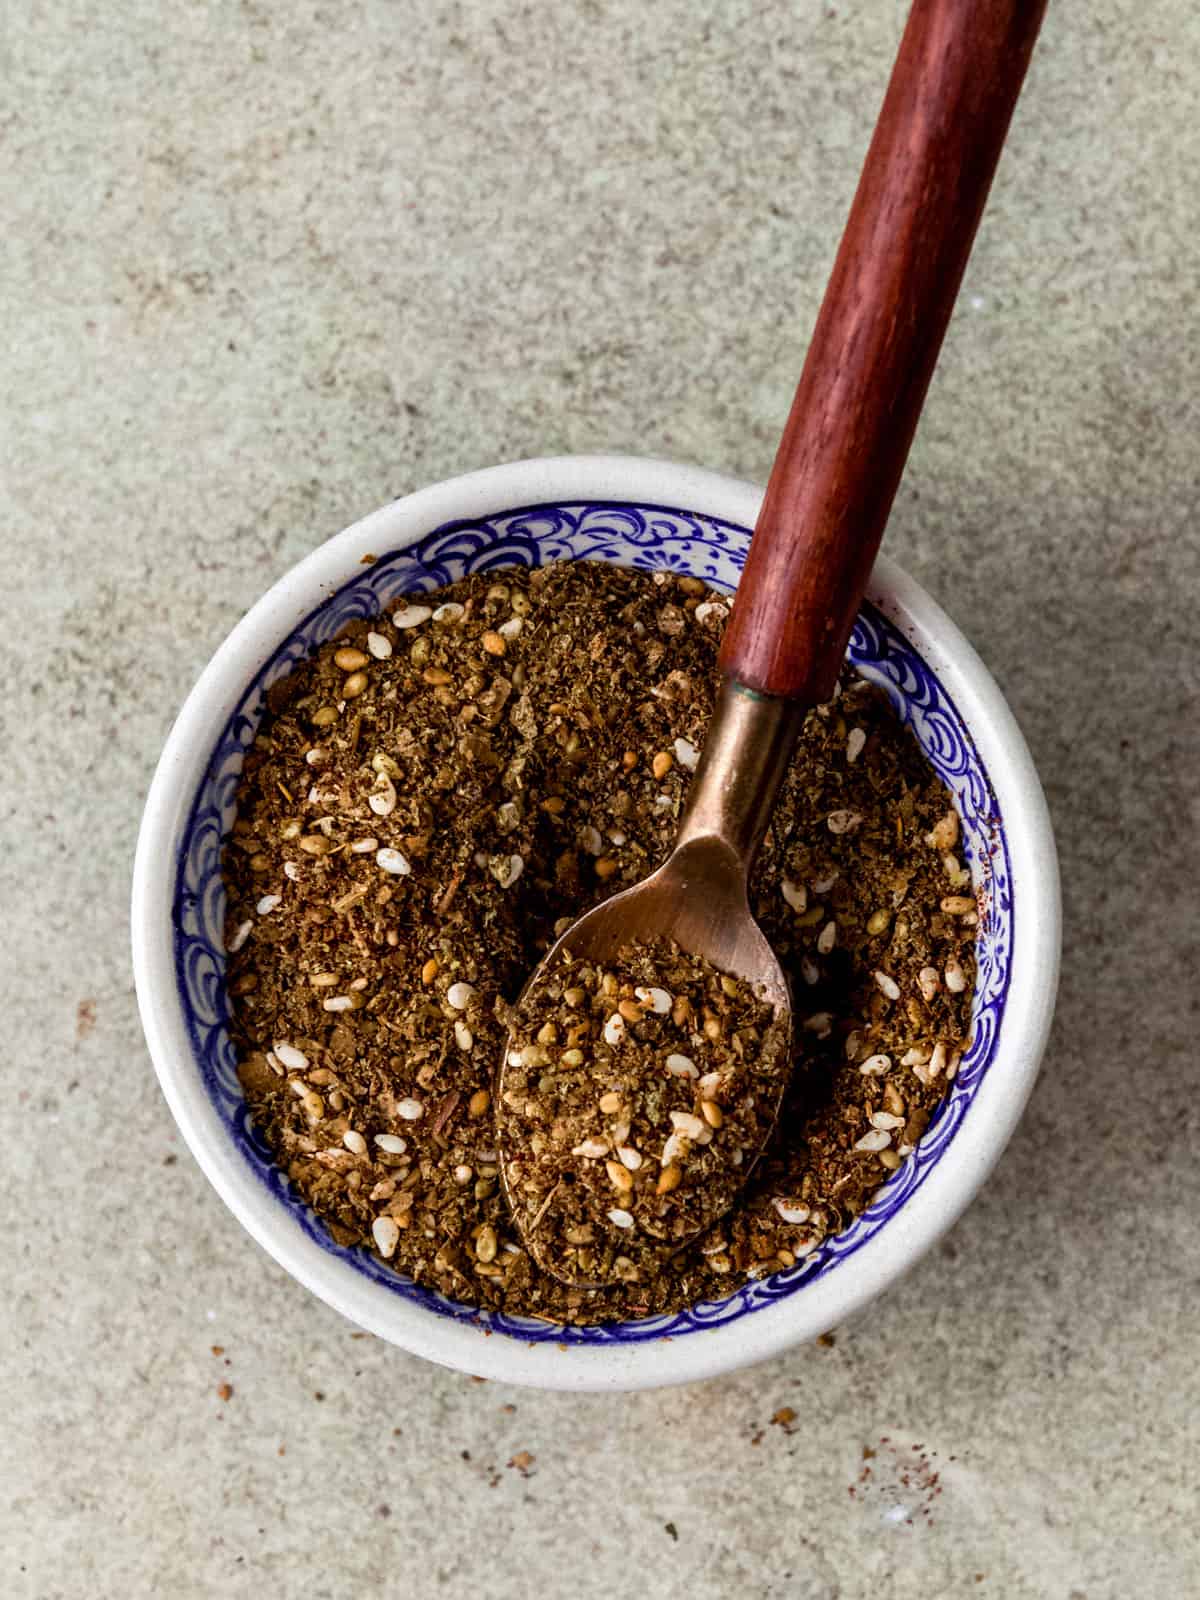 A small bowl filled with za'atar spice mix, which is a spice blend including sesame seeds, sumac and dried thyme.